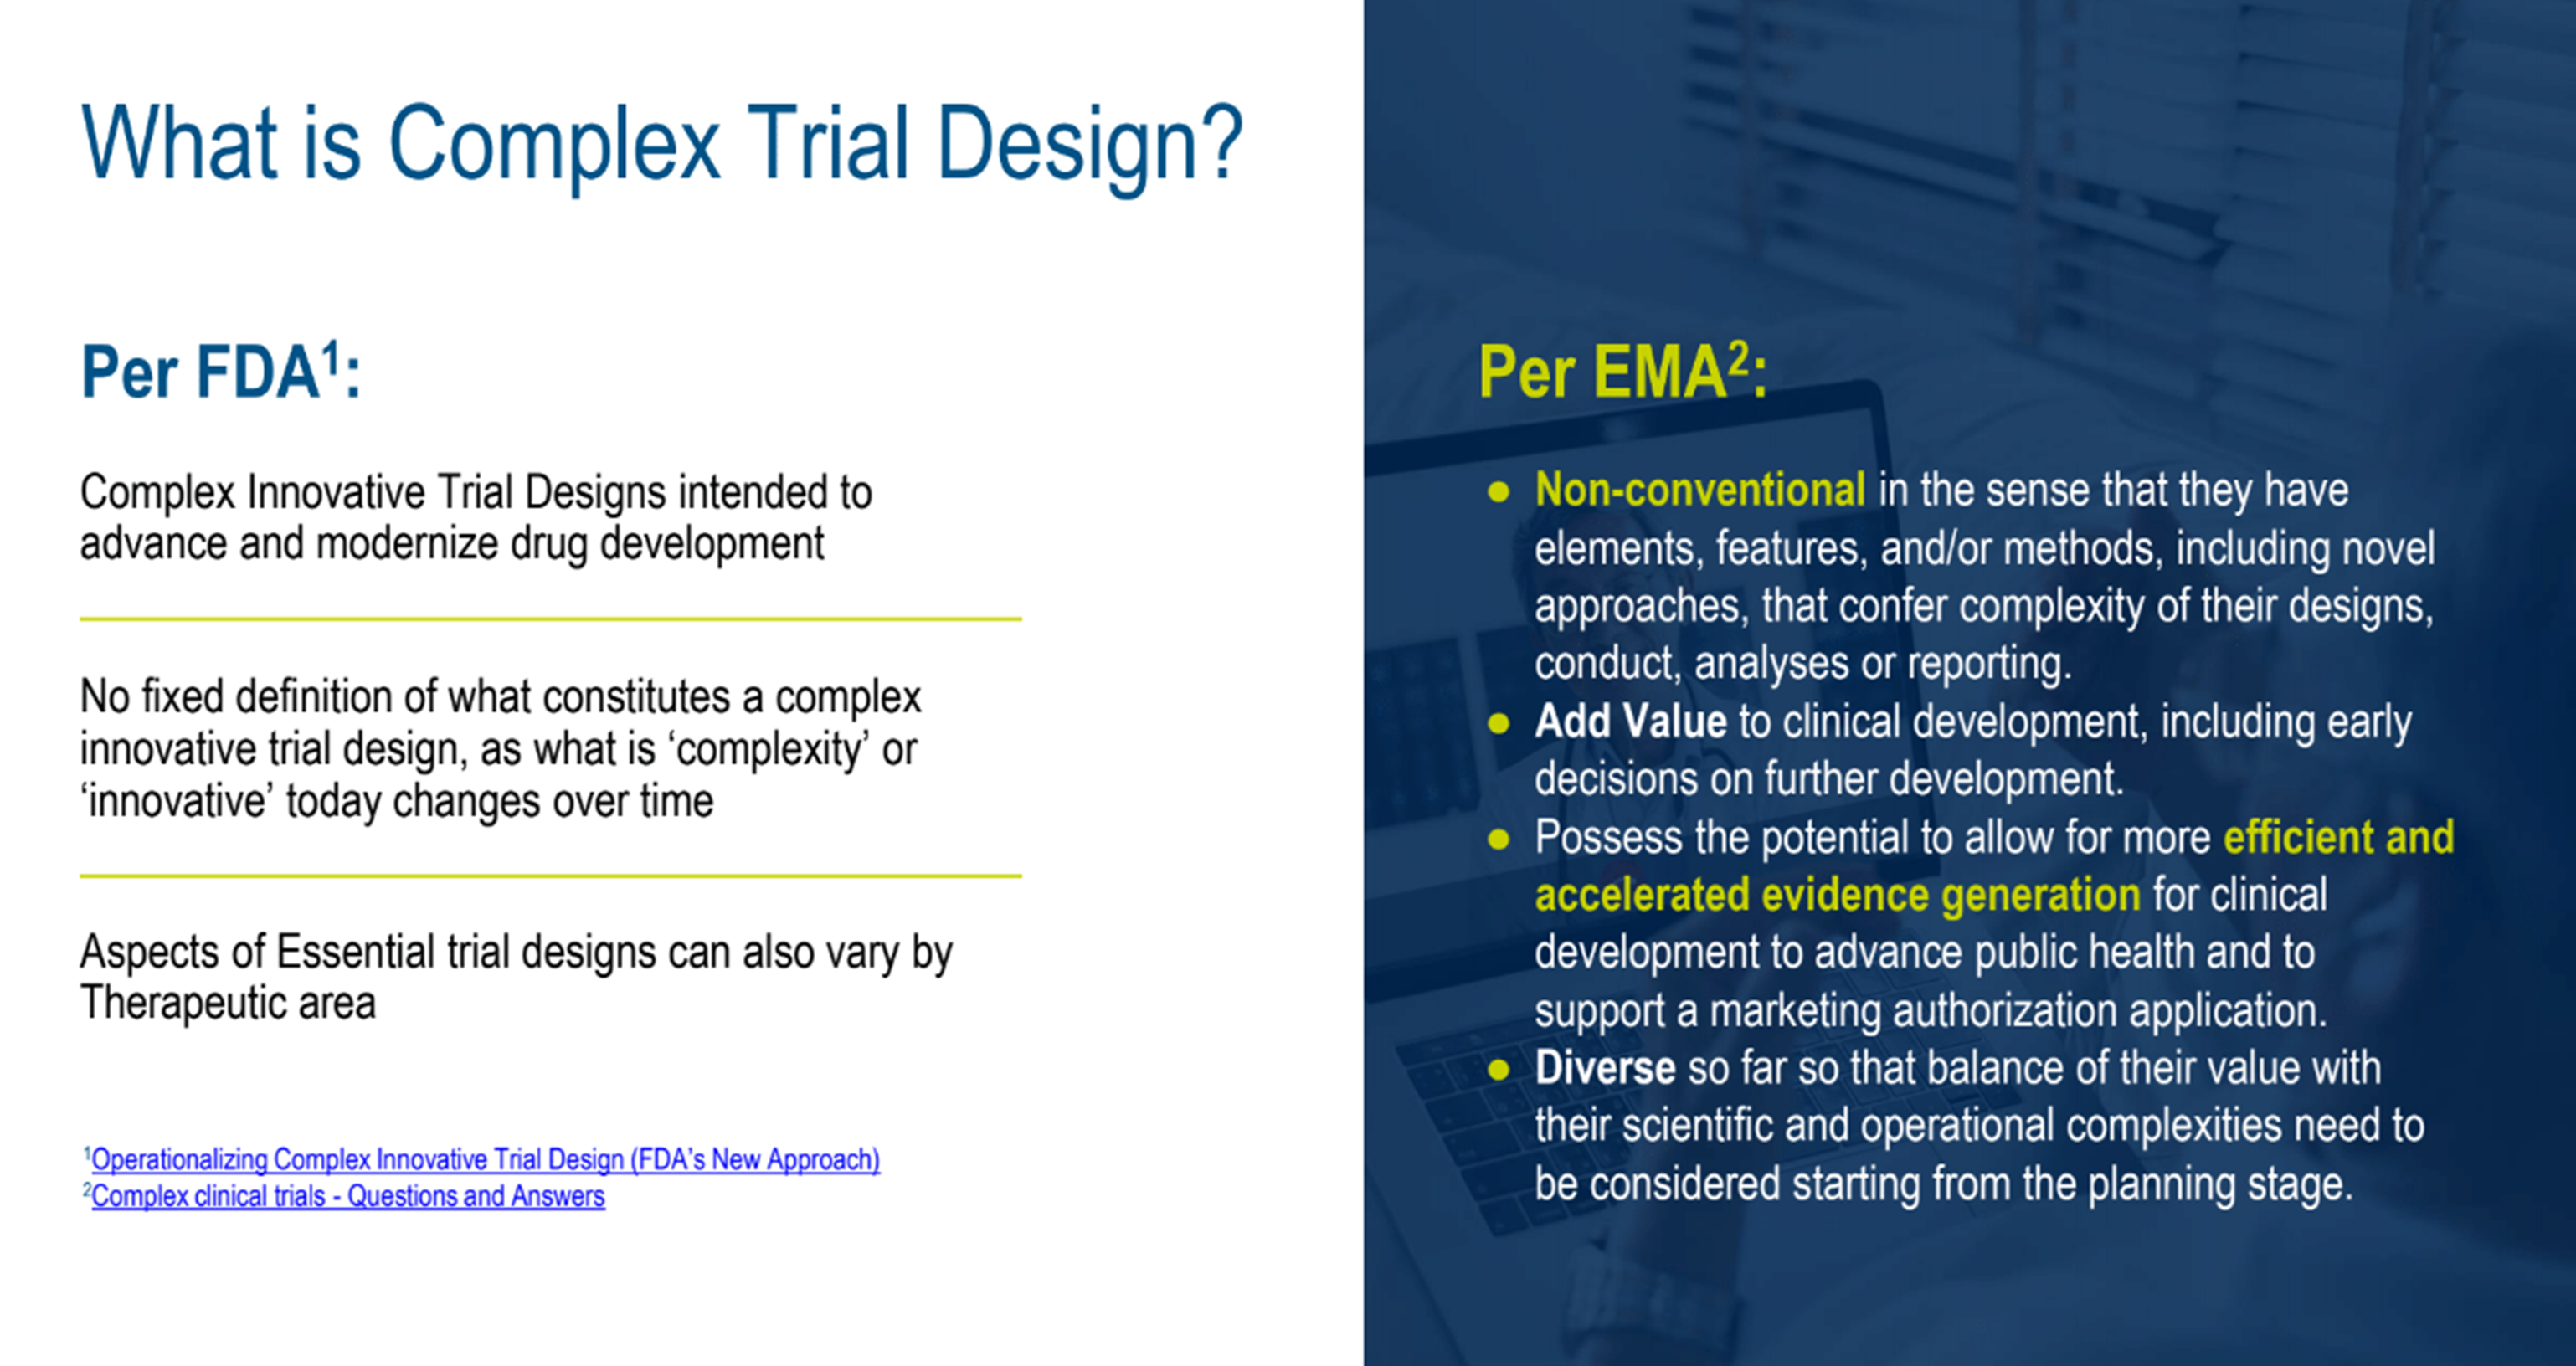 What is Complex Trial Design?